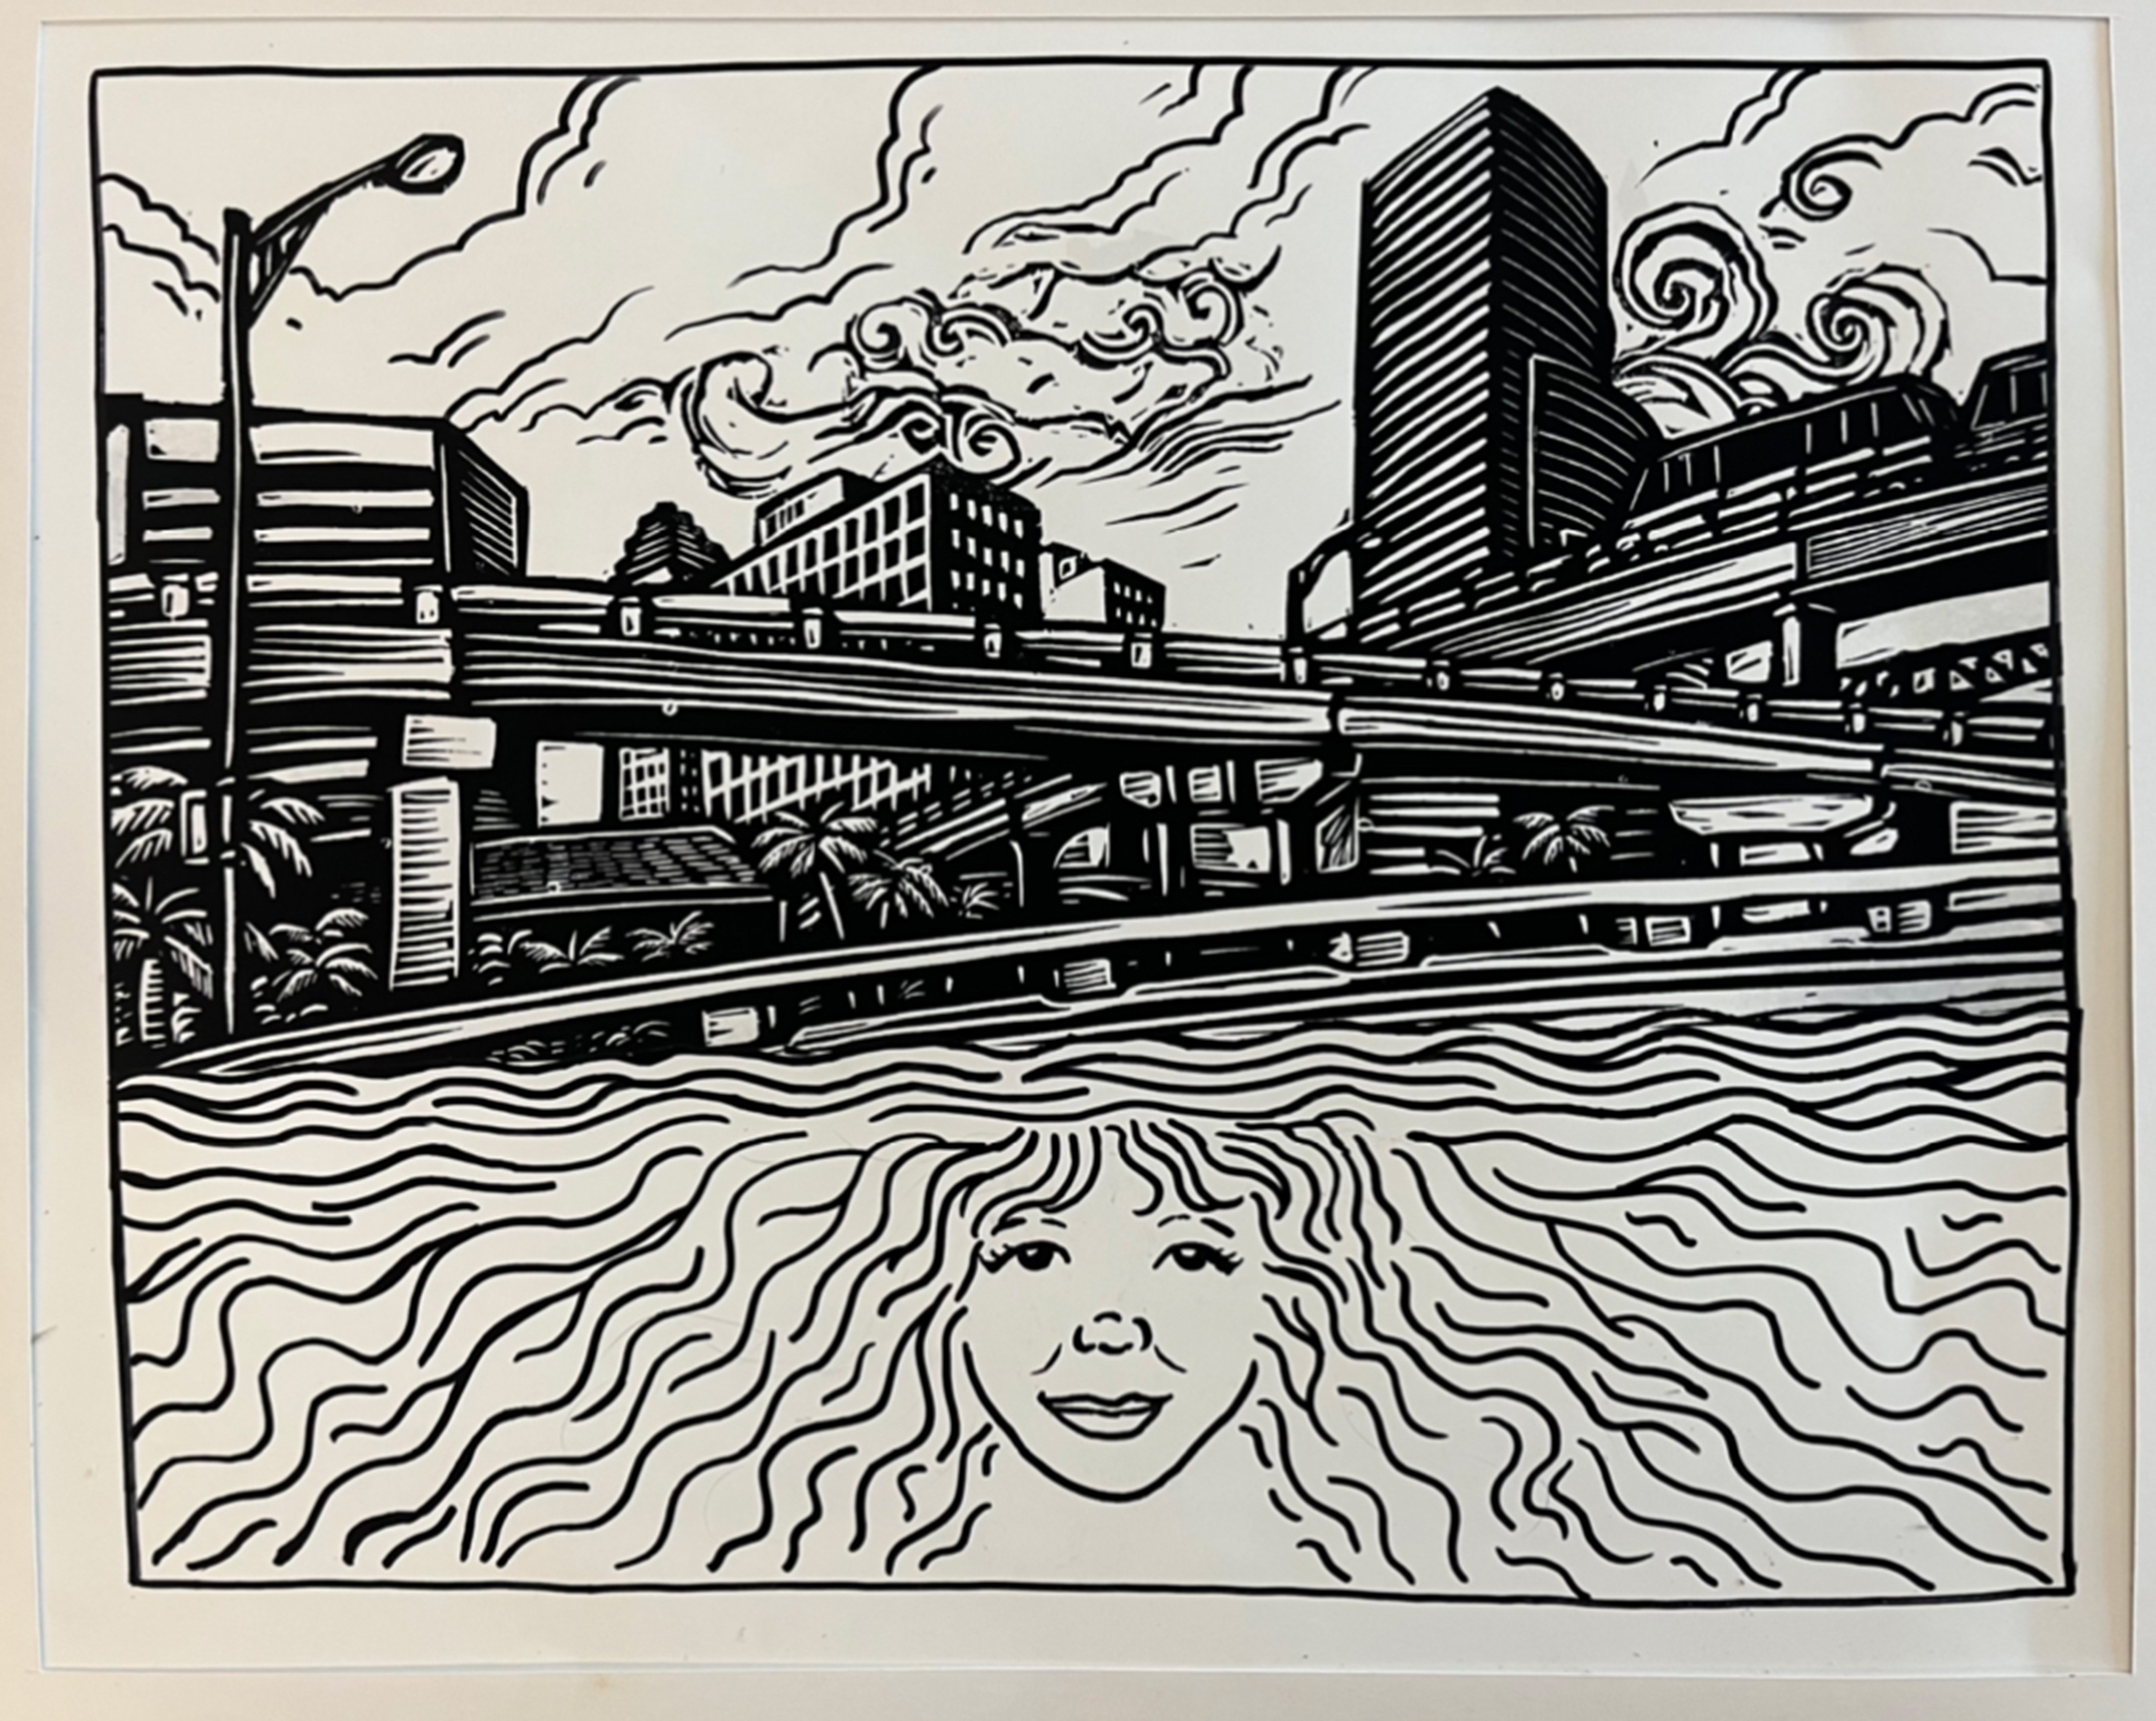 Black and white wood block print of a highway at the top and a woman's face with flowing hair at the bottom